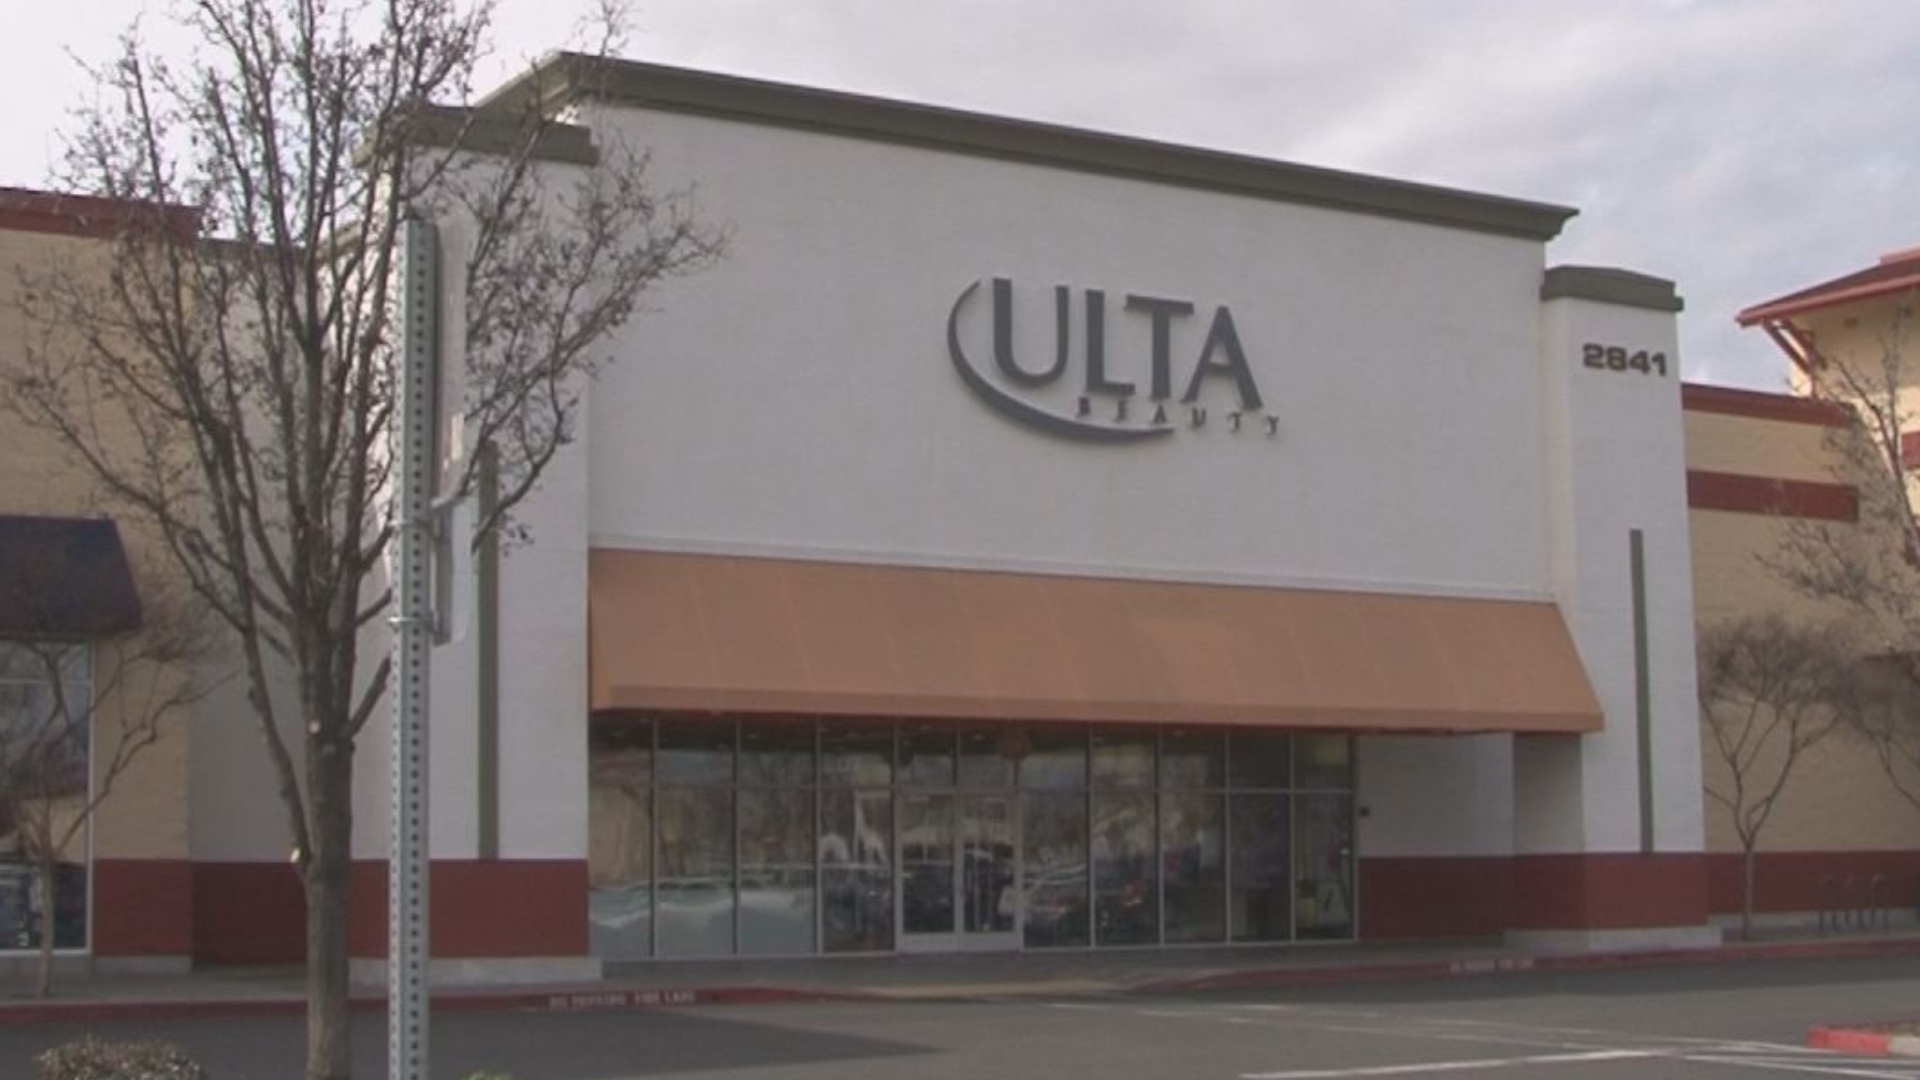 Four female suspects brazenly robbed a pair of San Joaquin Valley ULTA Beauty stores in broad daylight on Monday. Fresno Police say the first one happened in their city around 11:20 A.M. About two hours later, the same four suspects struck at a store in Turlock.